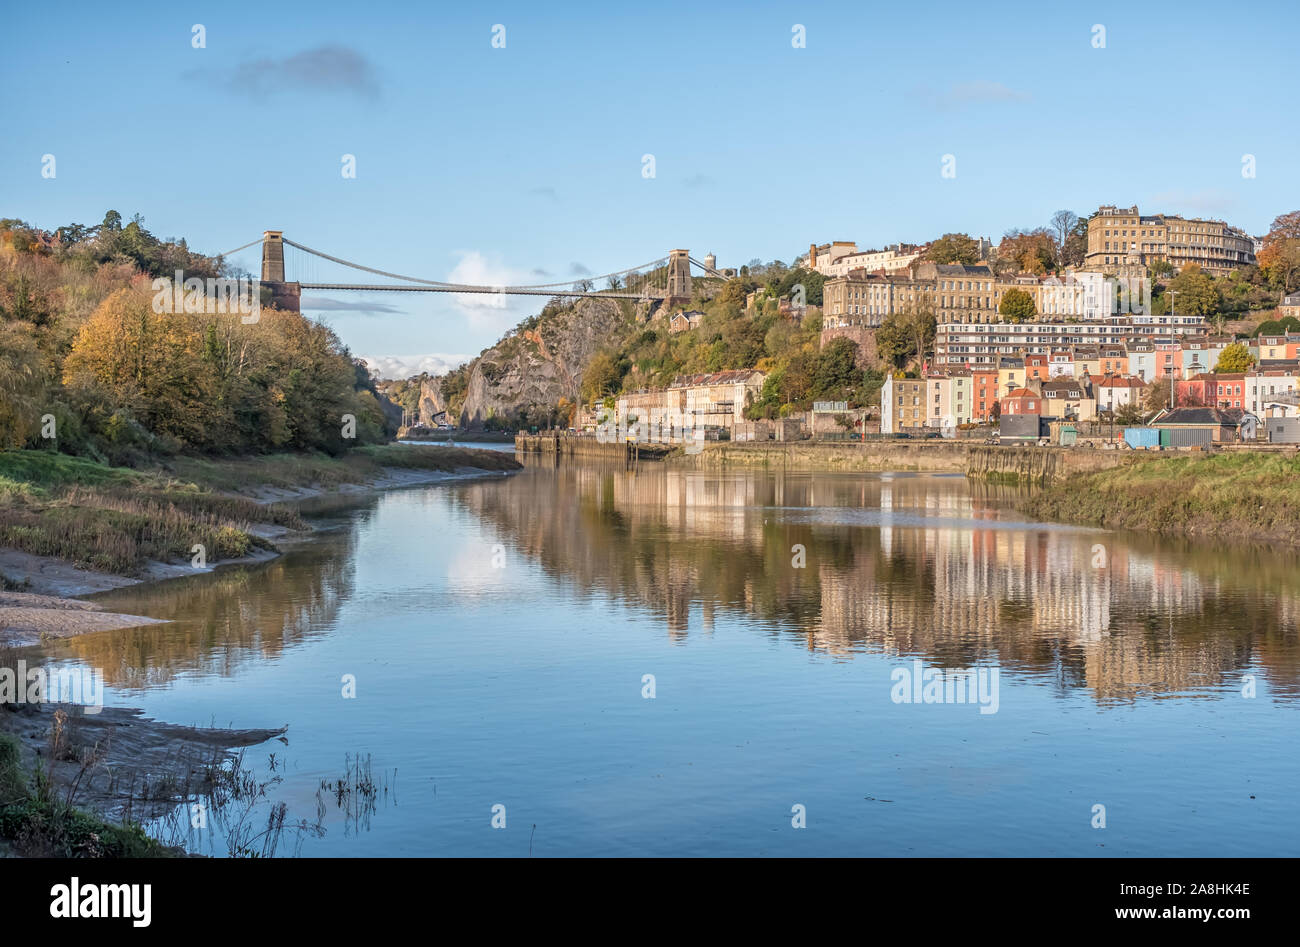 The Clifton Suspension Bridge, Hotwells and the Avon Gorge Looking North from the Leigh Woods side of the River Avon on a Sunny Evening, Bristol, UK Stock Photo